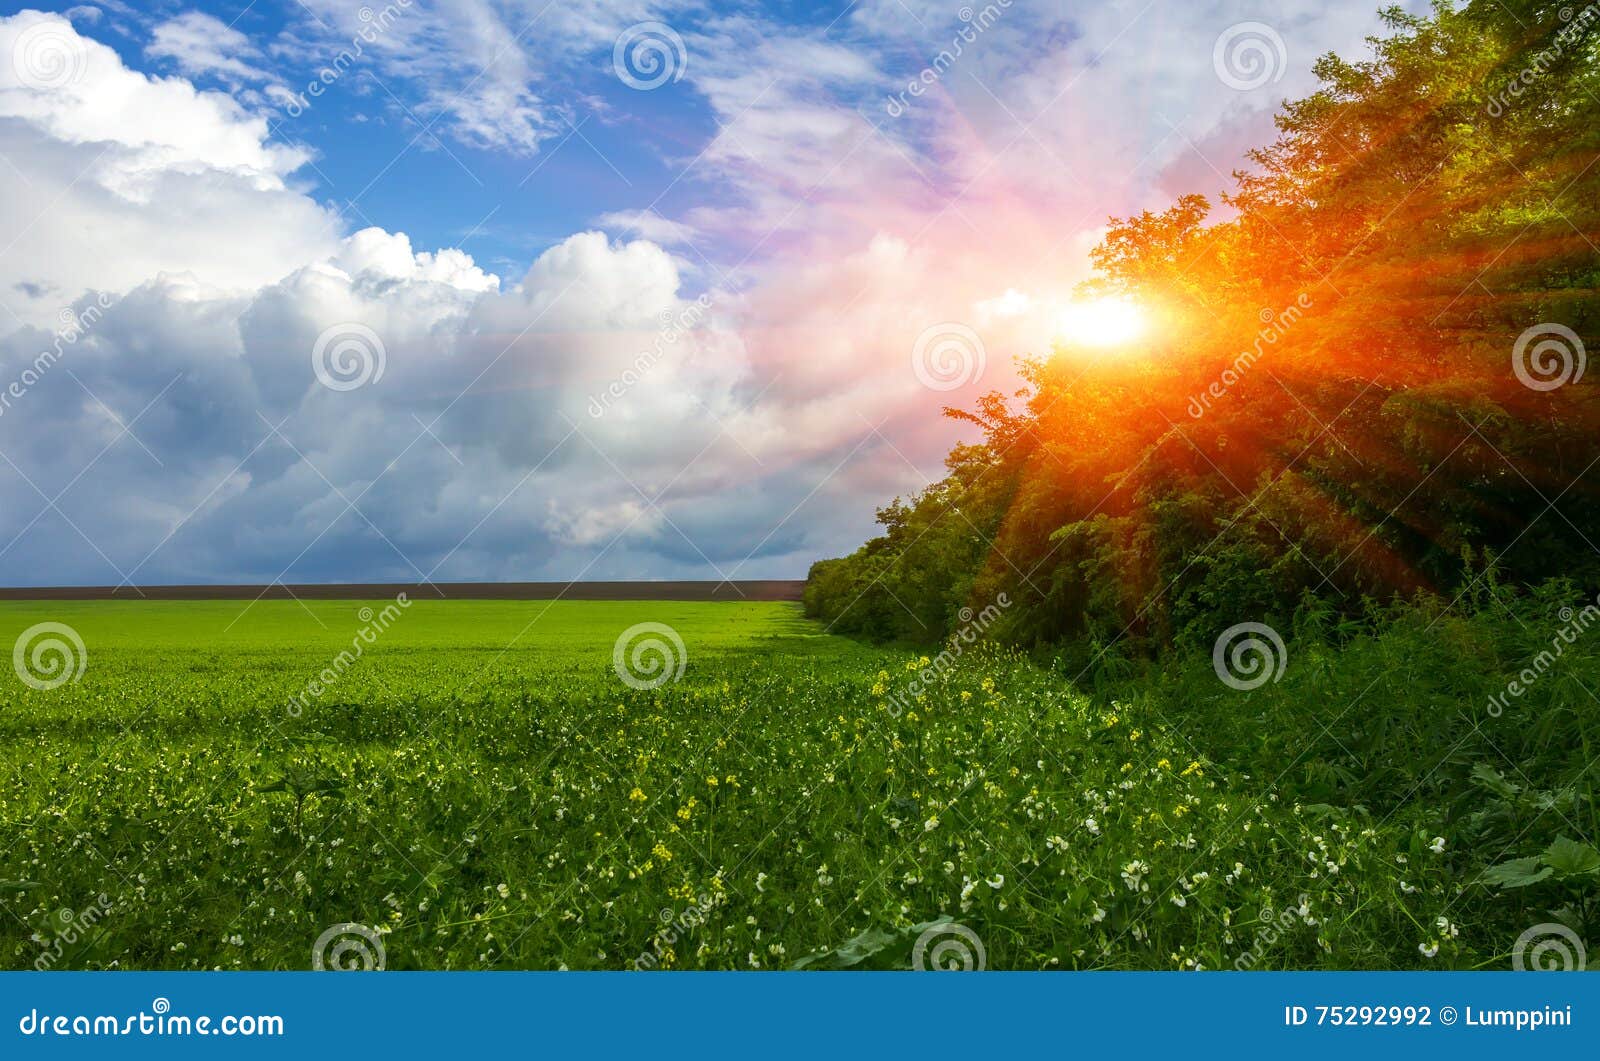 field flowering grass, grove, perfect clouds at sunset